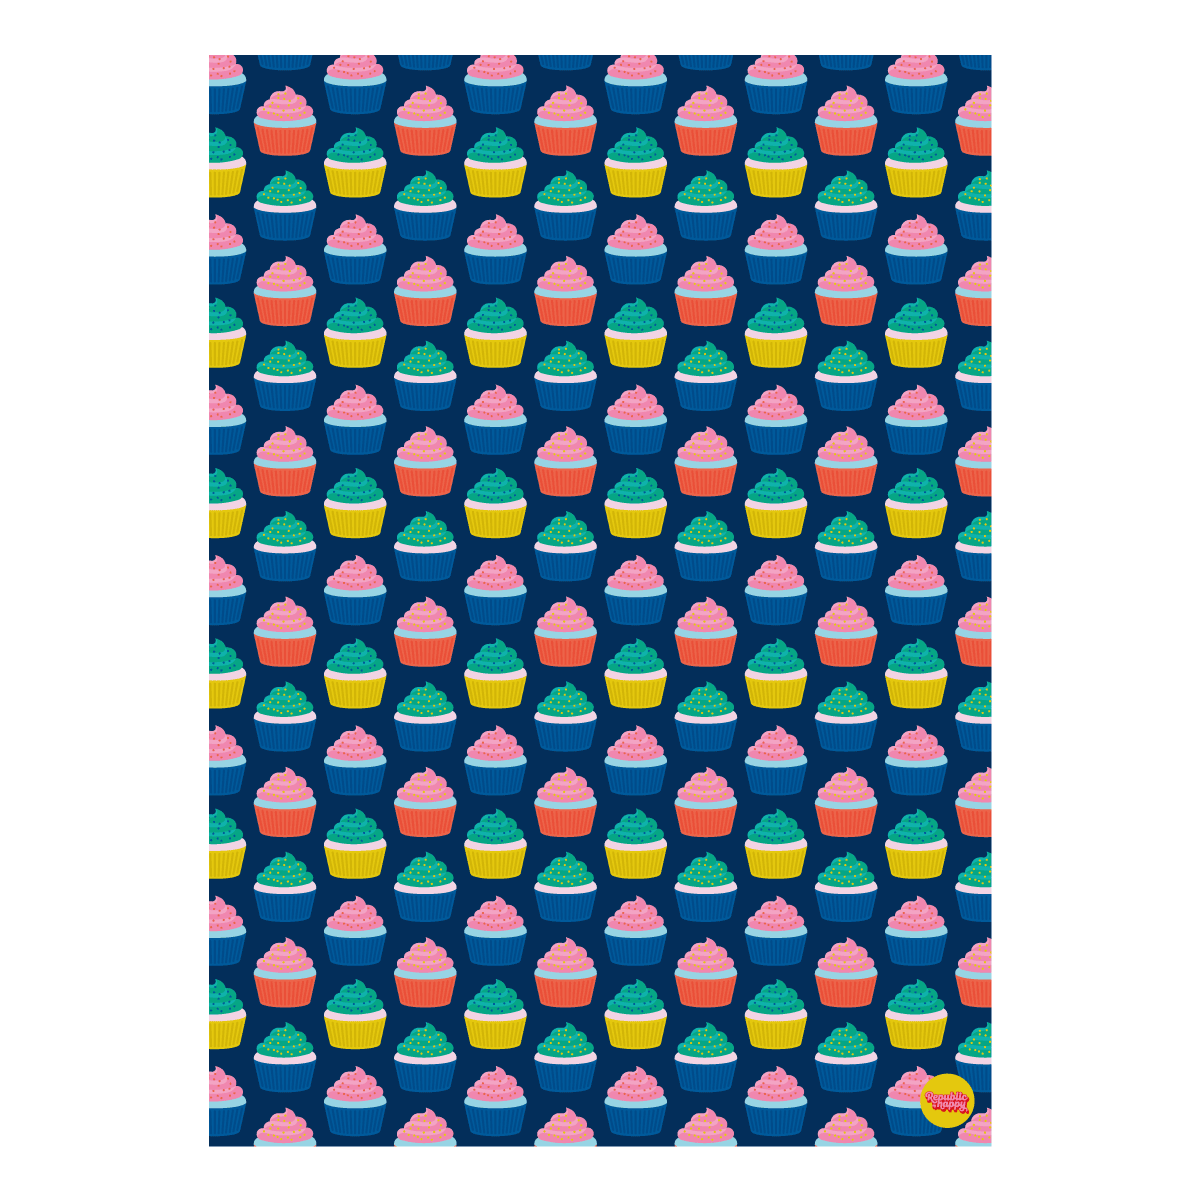 CUPCAKES wrapping paper - Colourful gift wrap sheets (3, 6 or 12)